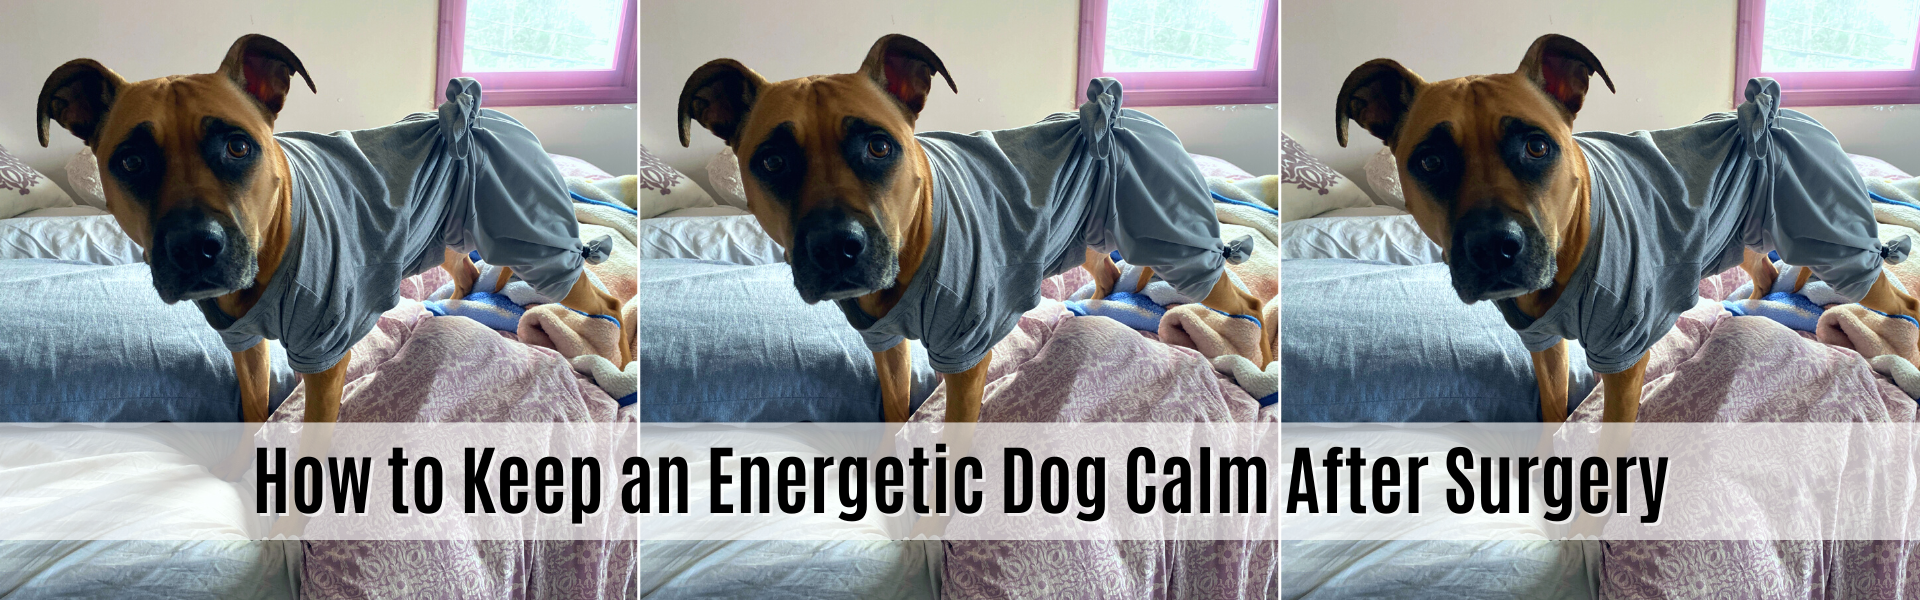 12 Creative Ideas on How to Keep an Energetic Dog Calm After Surgery